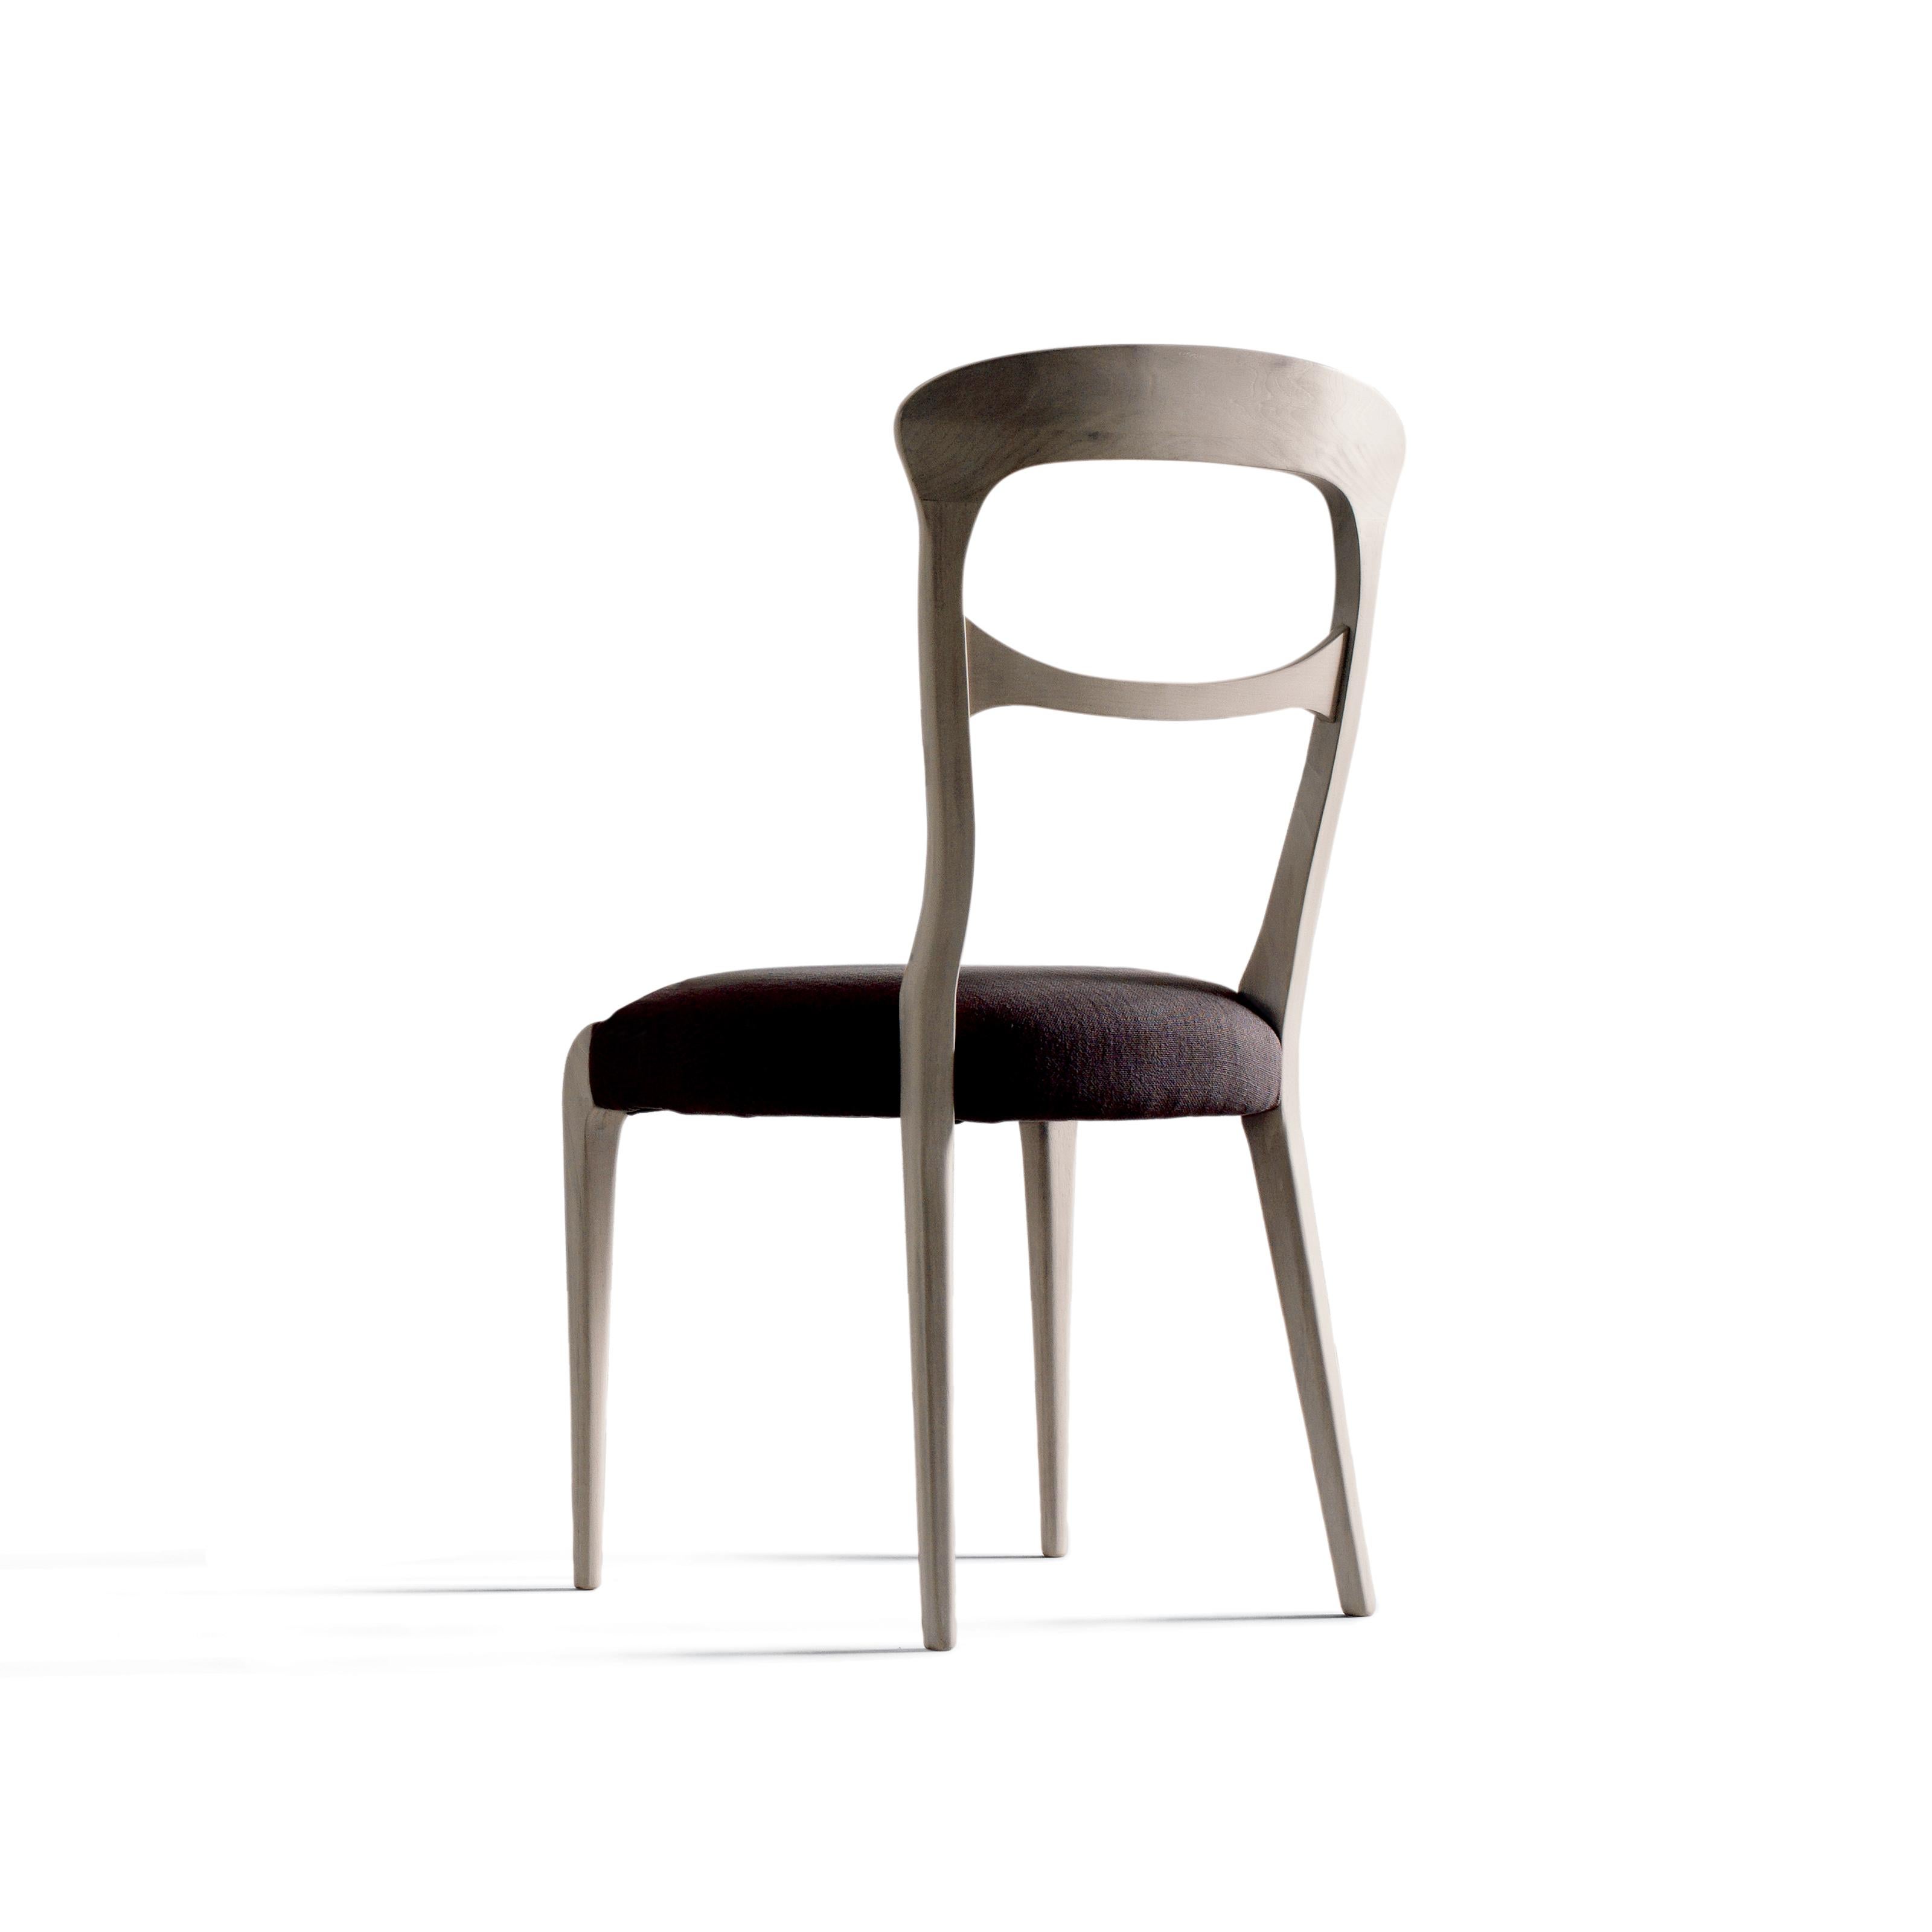 The Capotavola solid wood chair embodies the refined elegance of Italian design. Made in Italy by hand, it features solid canaletto walnut structure with acrylic finish and lining in premium leather or fabric in a range of different colors.